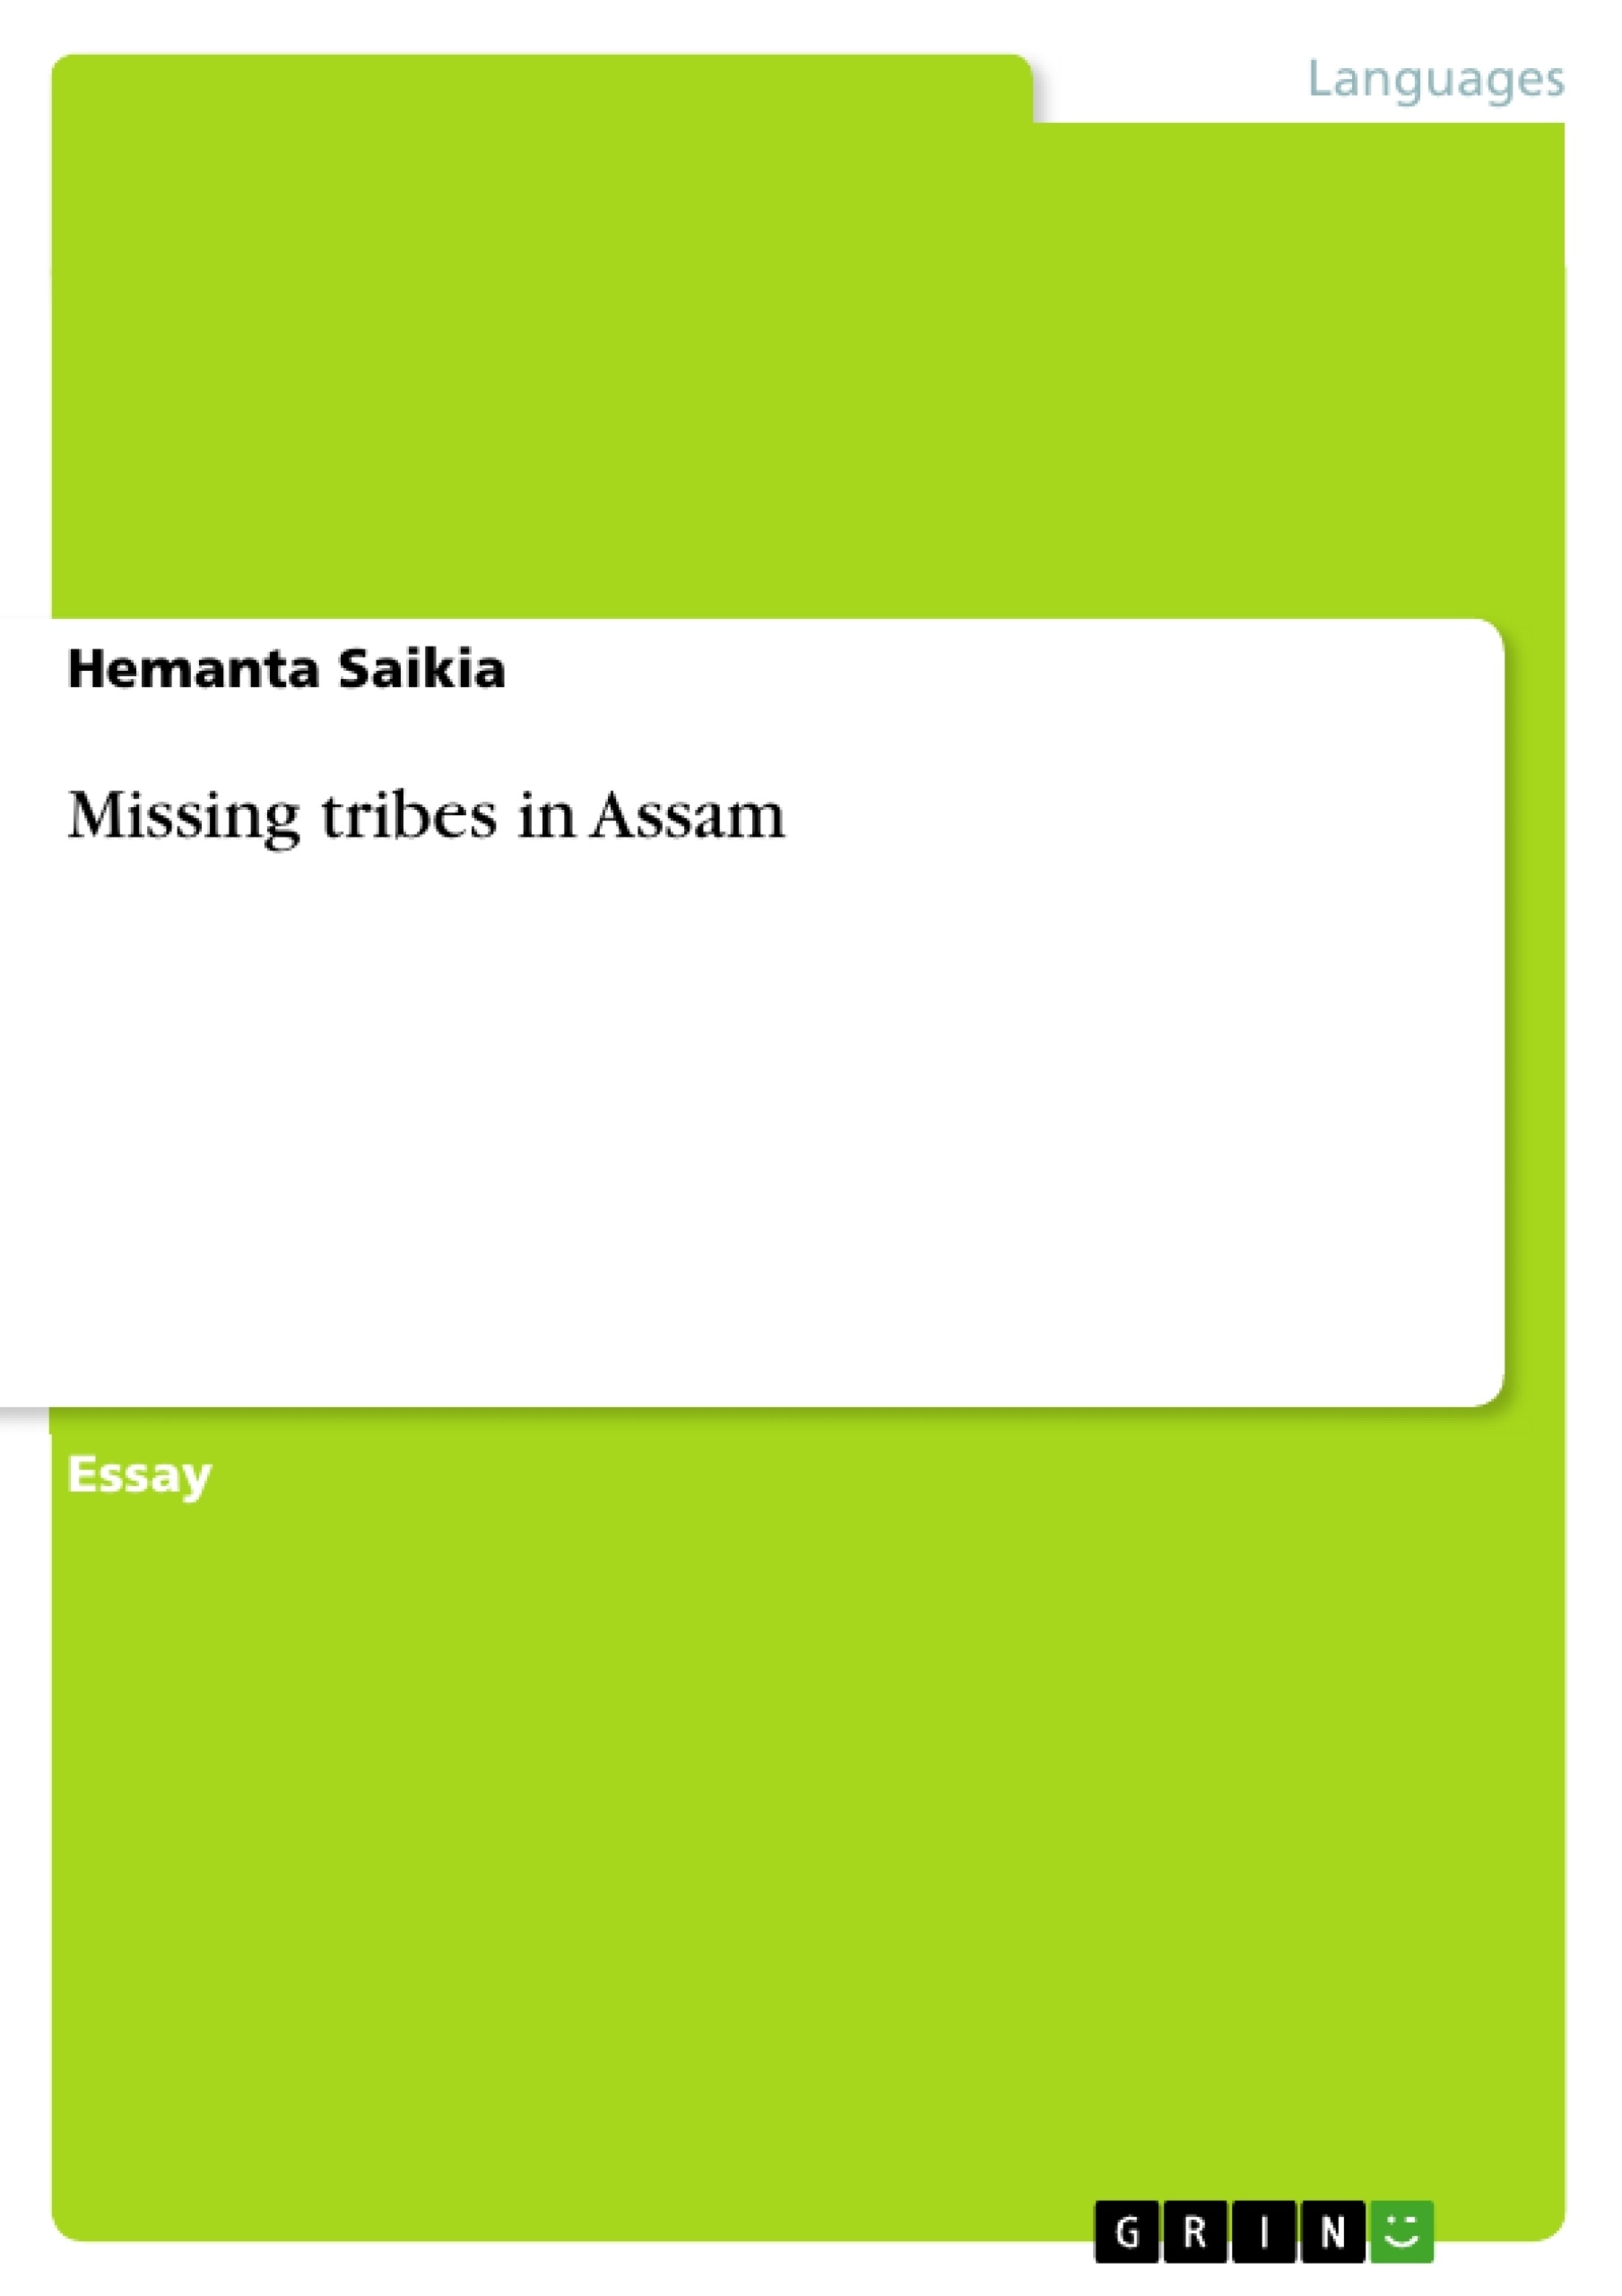 Title: Missing tribes in Assam